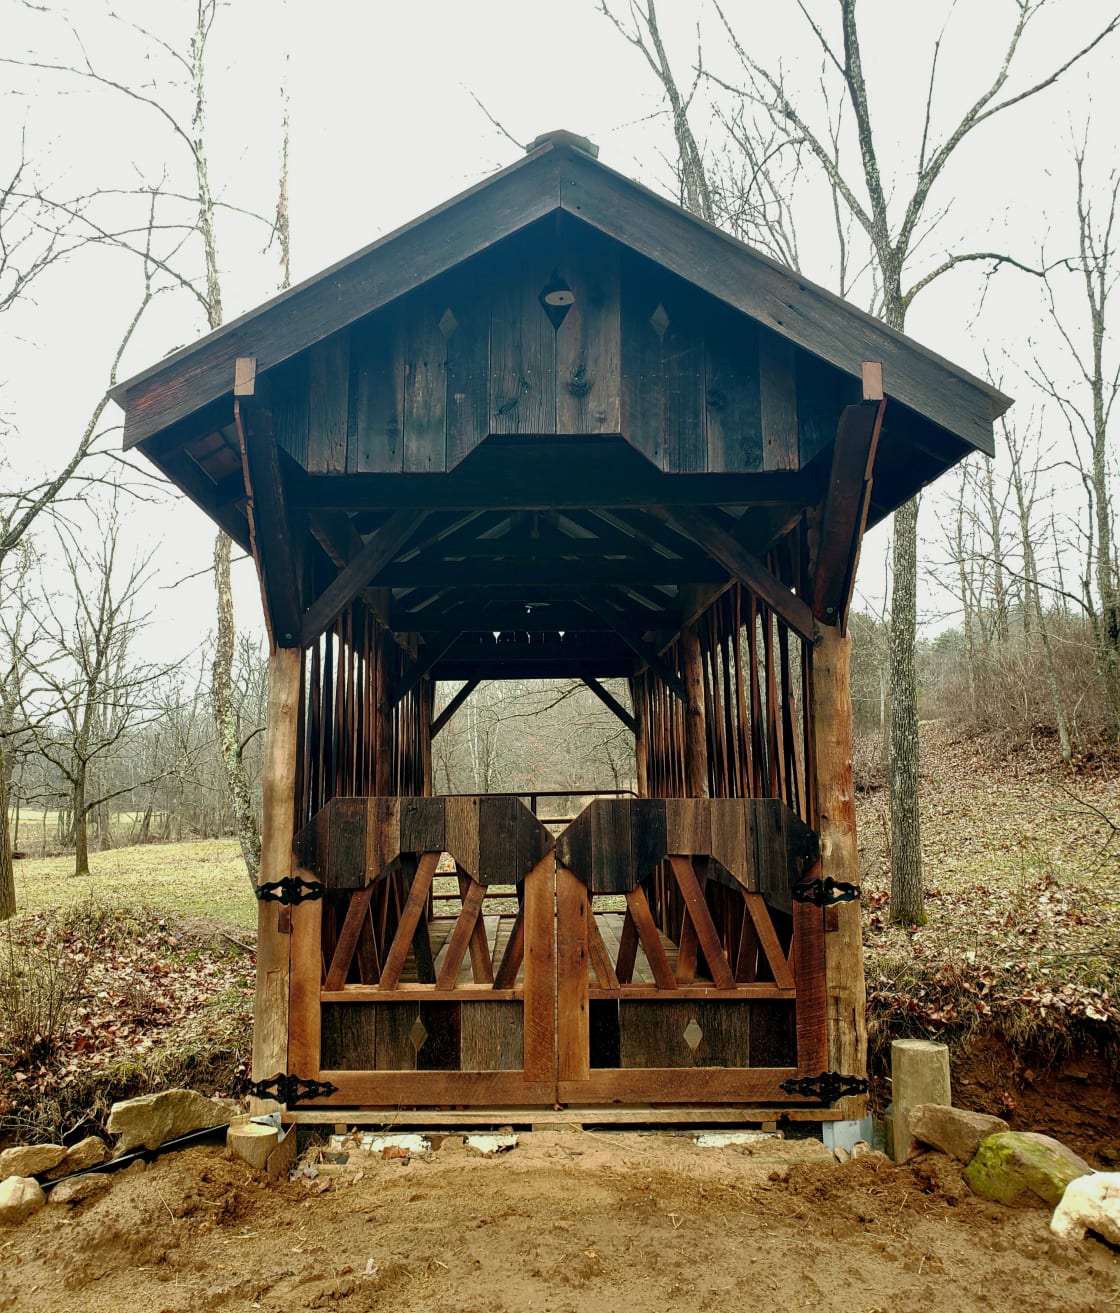 The historic restored covered bridge that brings you across the creek from the parking area to the camping area. Also perfect for photo shoots and weddings/ceremonies.